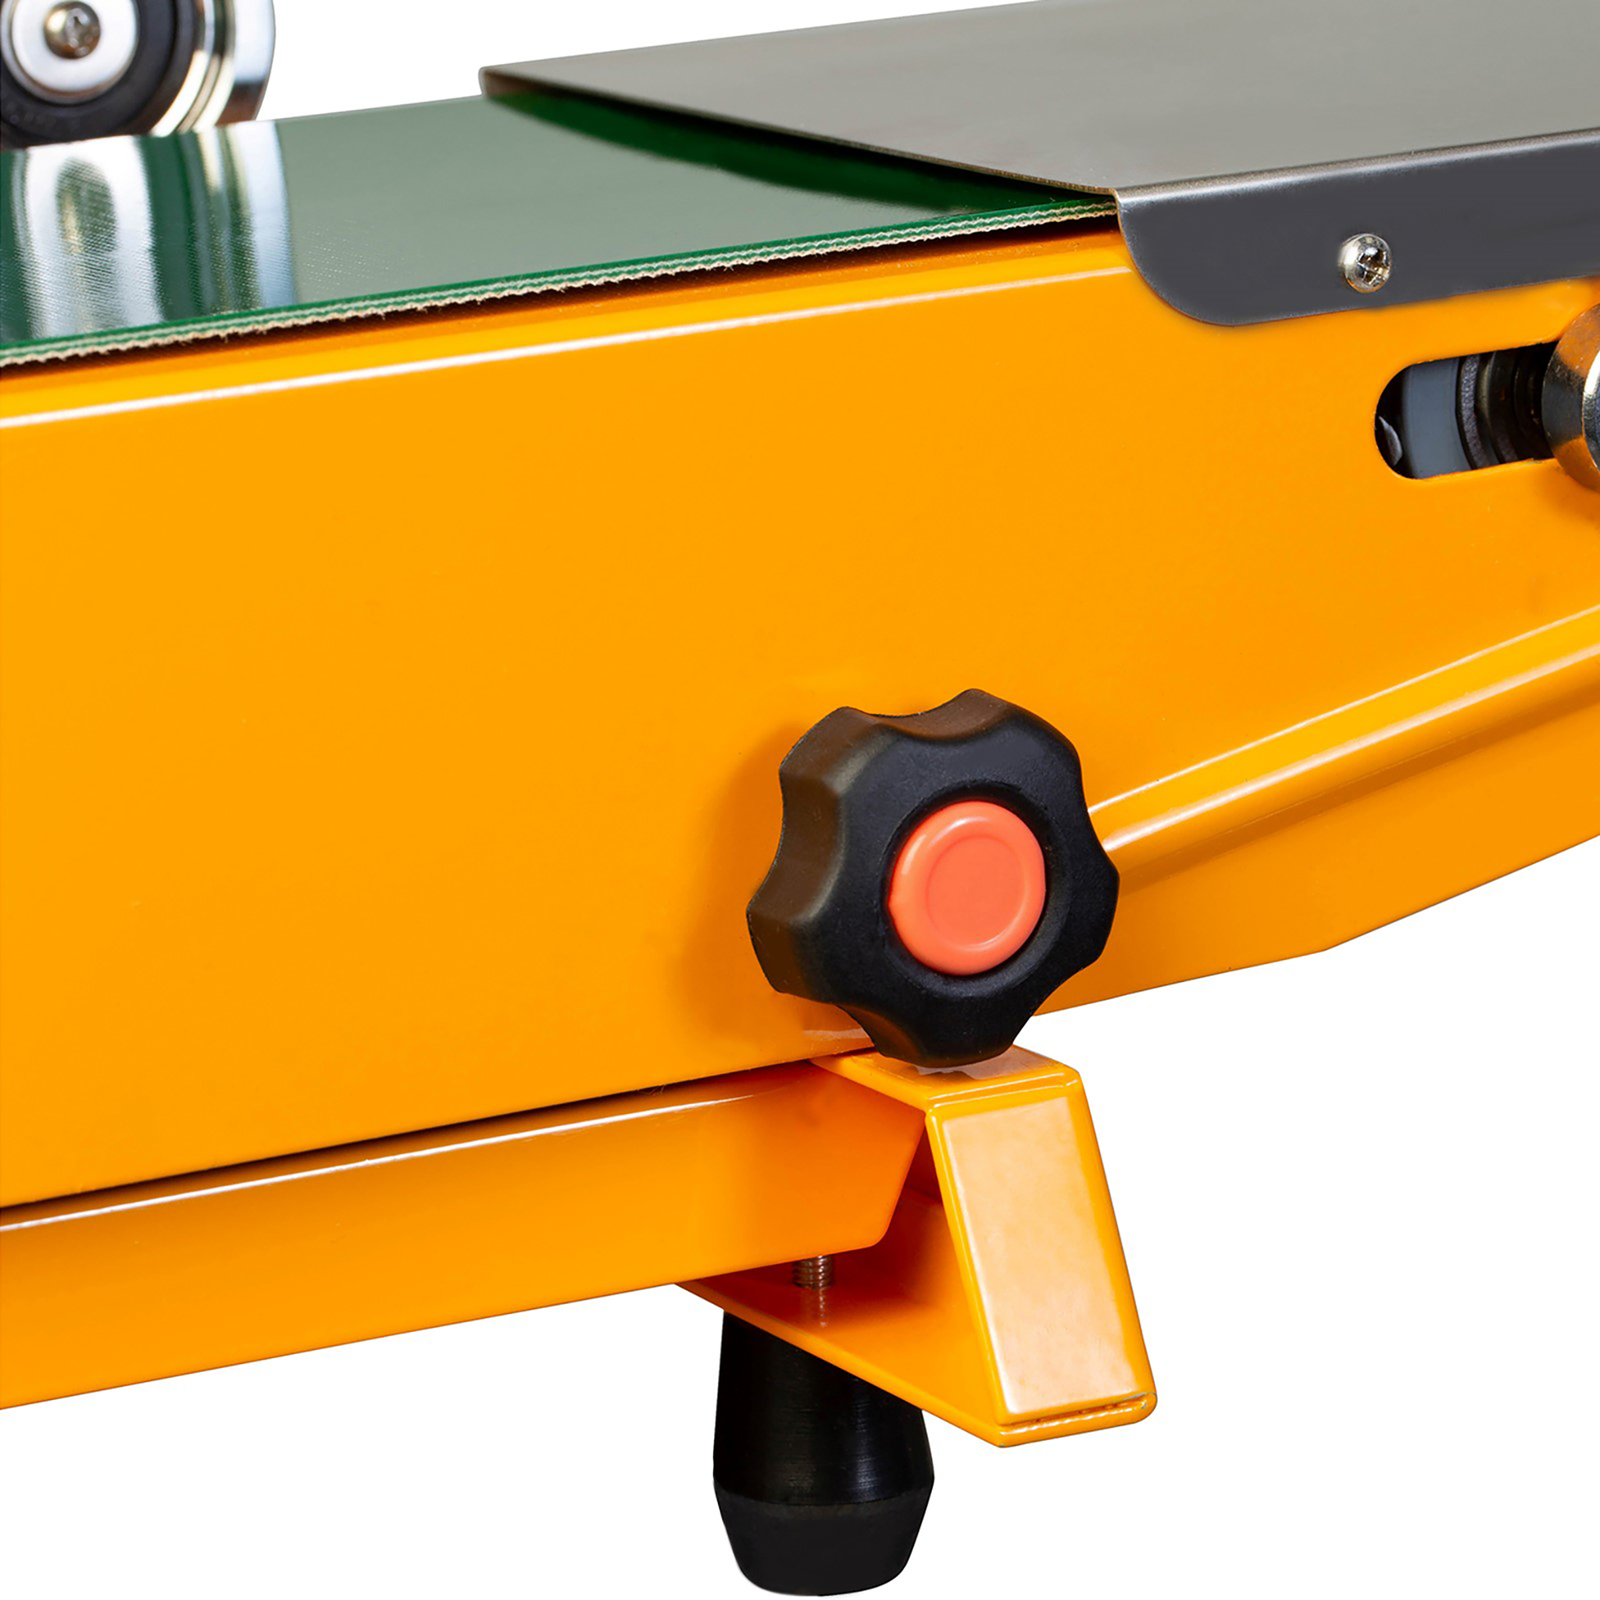 leg of yellow sealing machine with black knobs to adjust position of the  band of the JORESTECH bag sealer